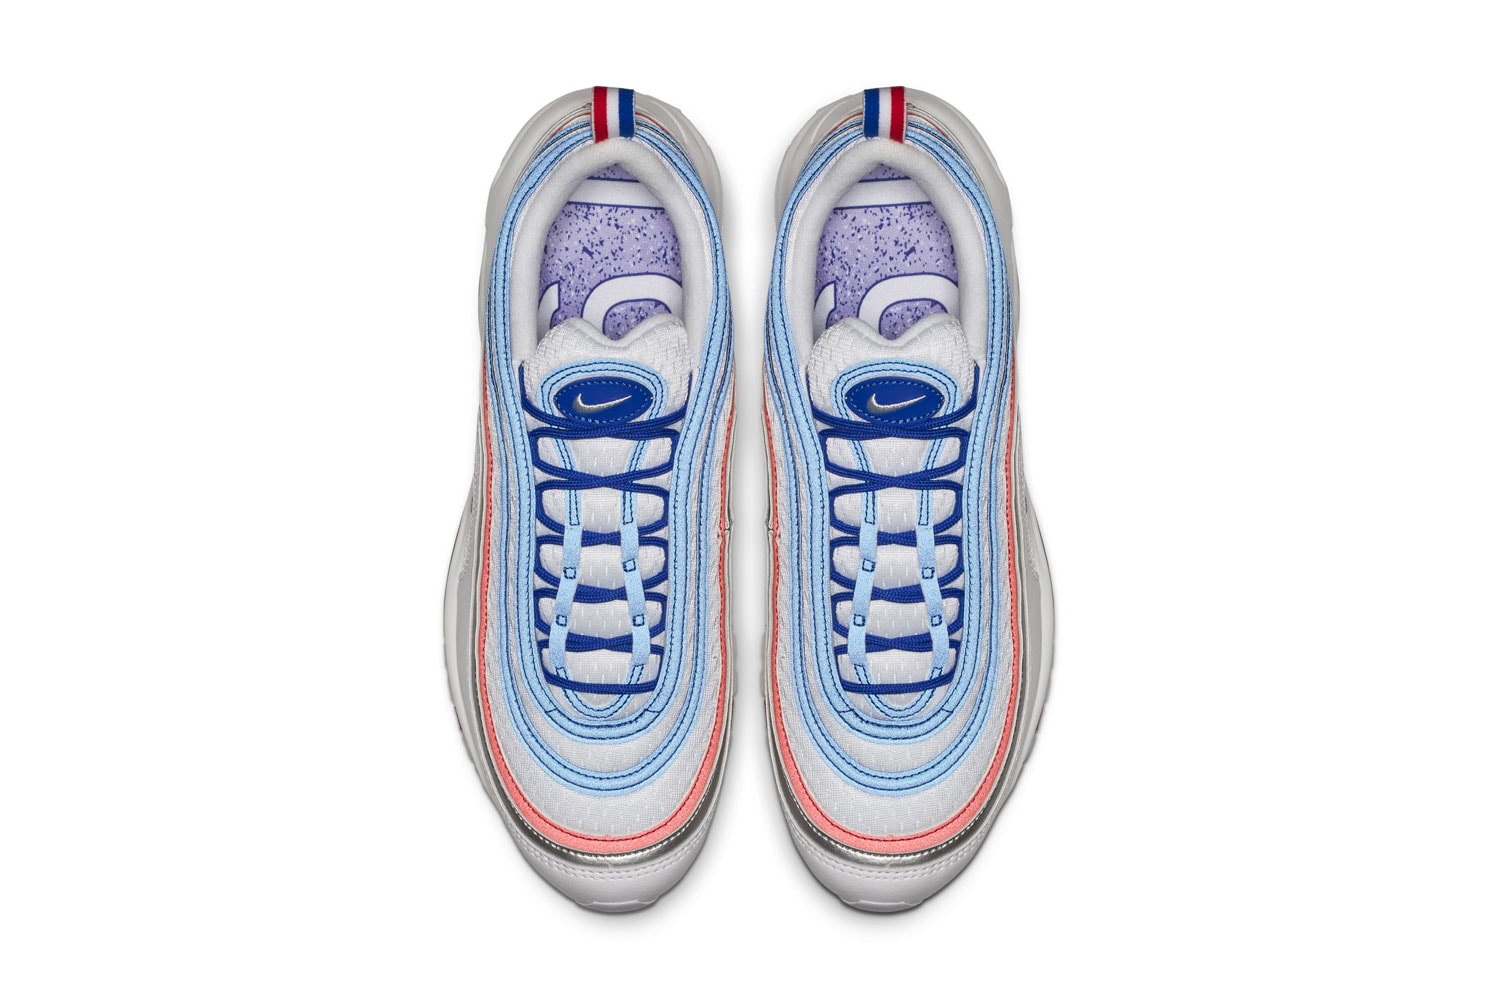 Nike Air Max 97 "Game Royal/Metallic Silver" Release Info date price sneaker colorway blue red silver white 